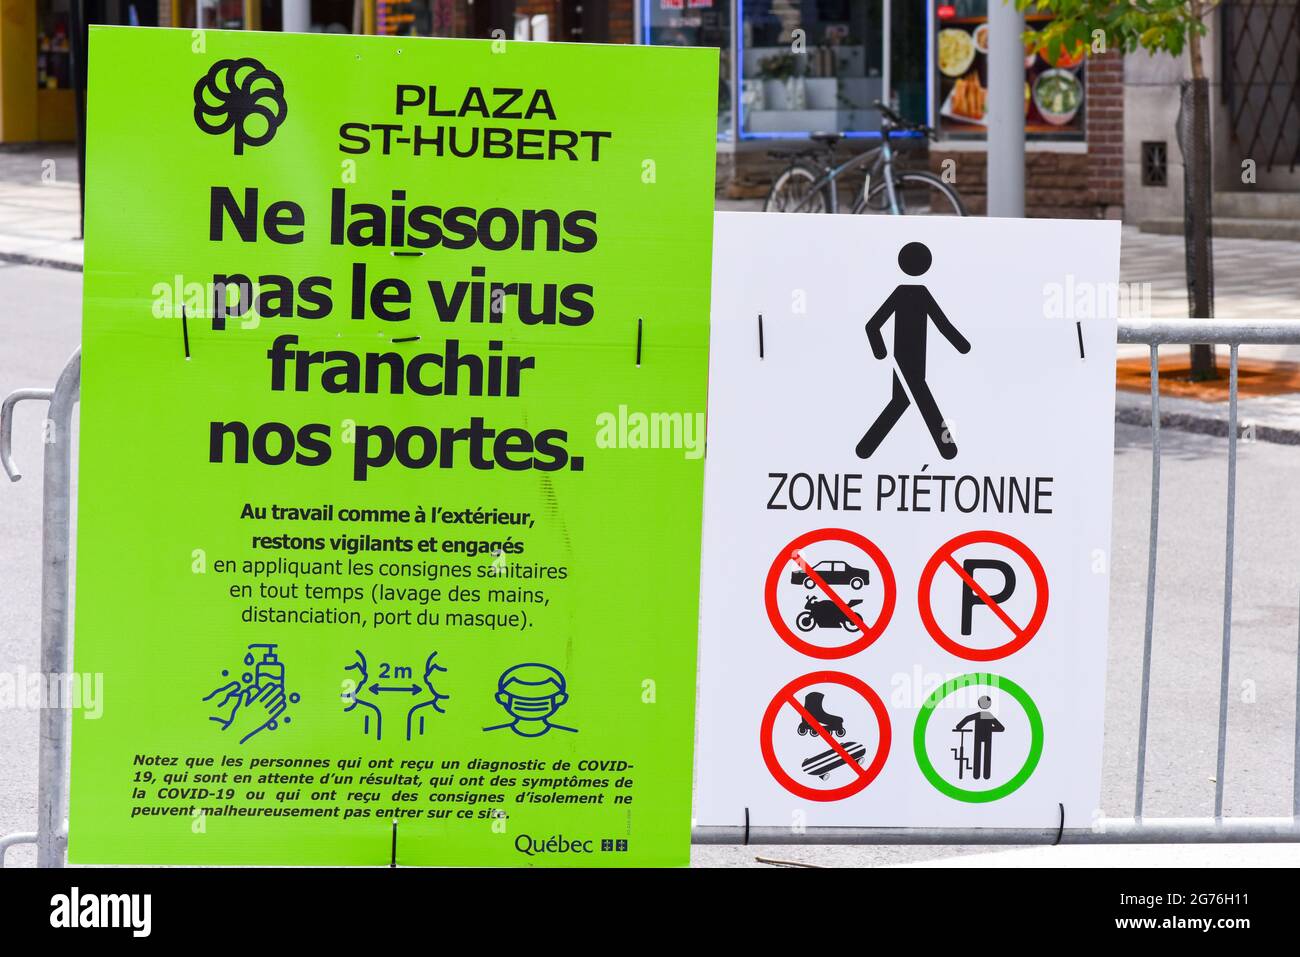 Public Notice at sidewalk sale: The sign warns people to be careful and respect sanitary measures in order not to catch Covid-19, Montreal, Canada Stock Photo